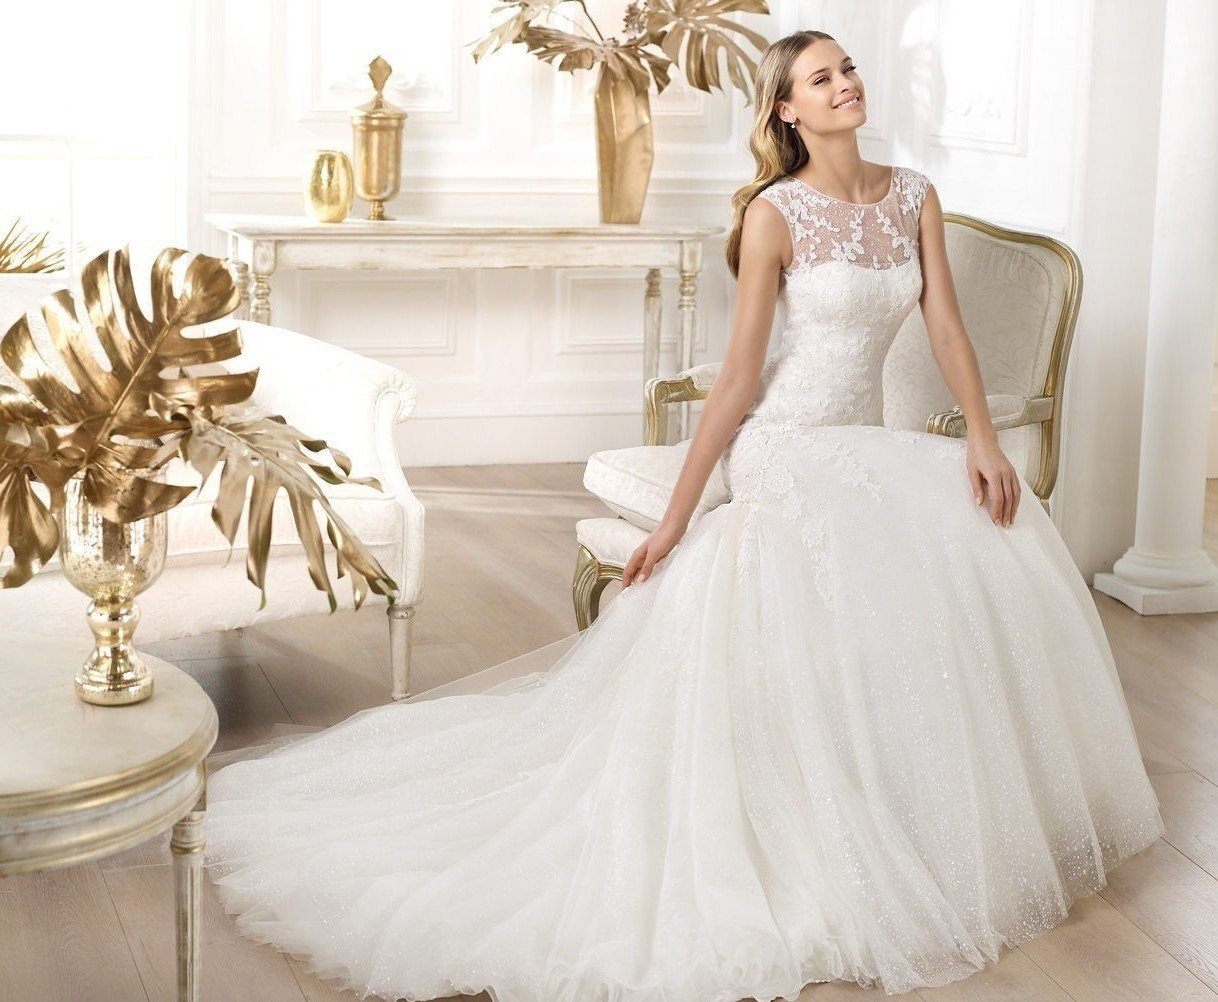 Wedding Gowns For Rent
 Rent Your Dream Wedding Dress With Perfect Fit And